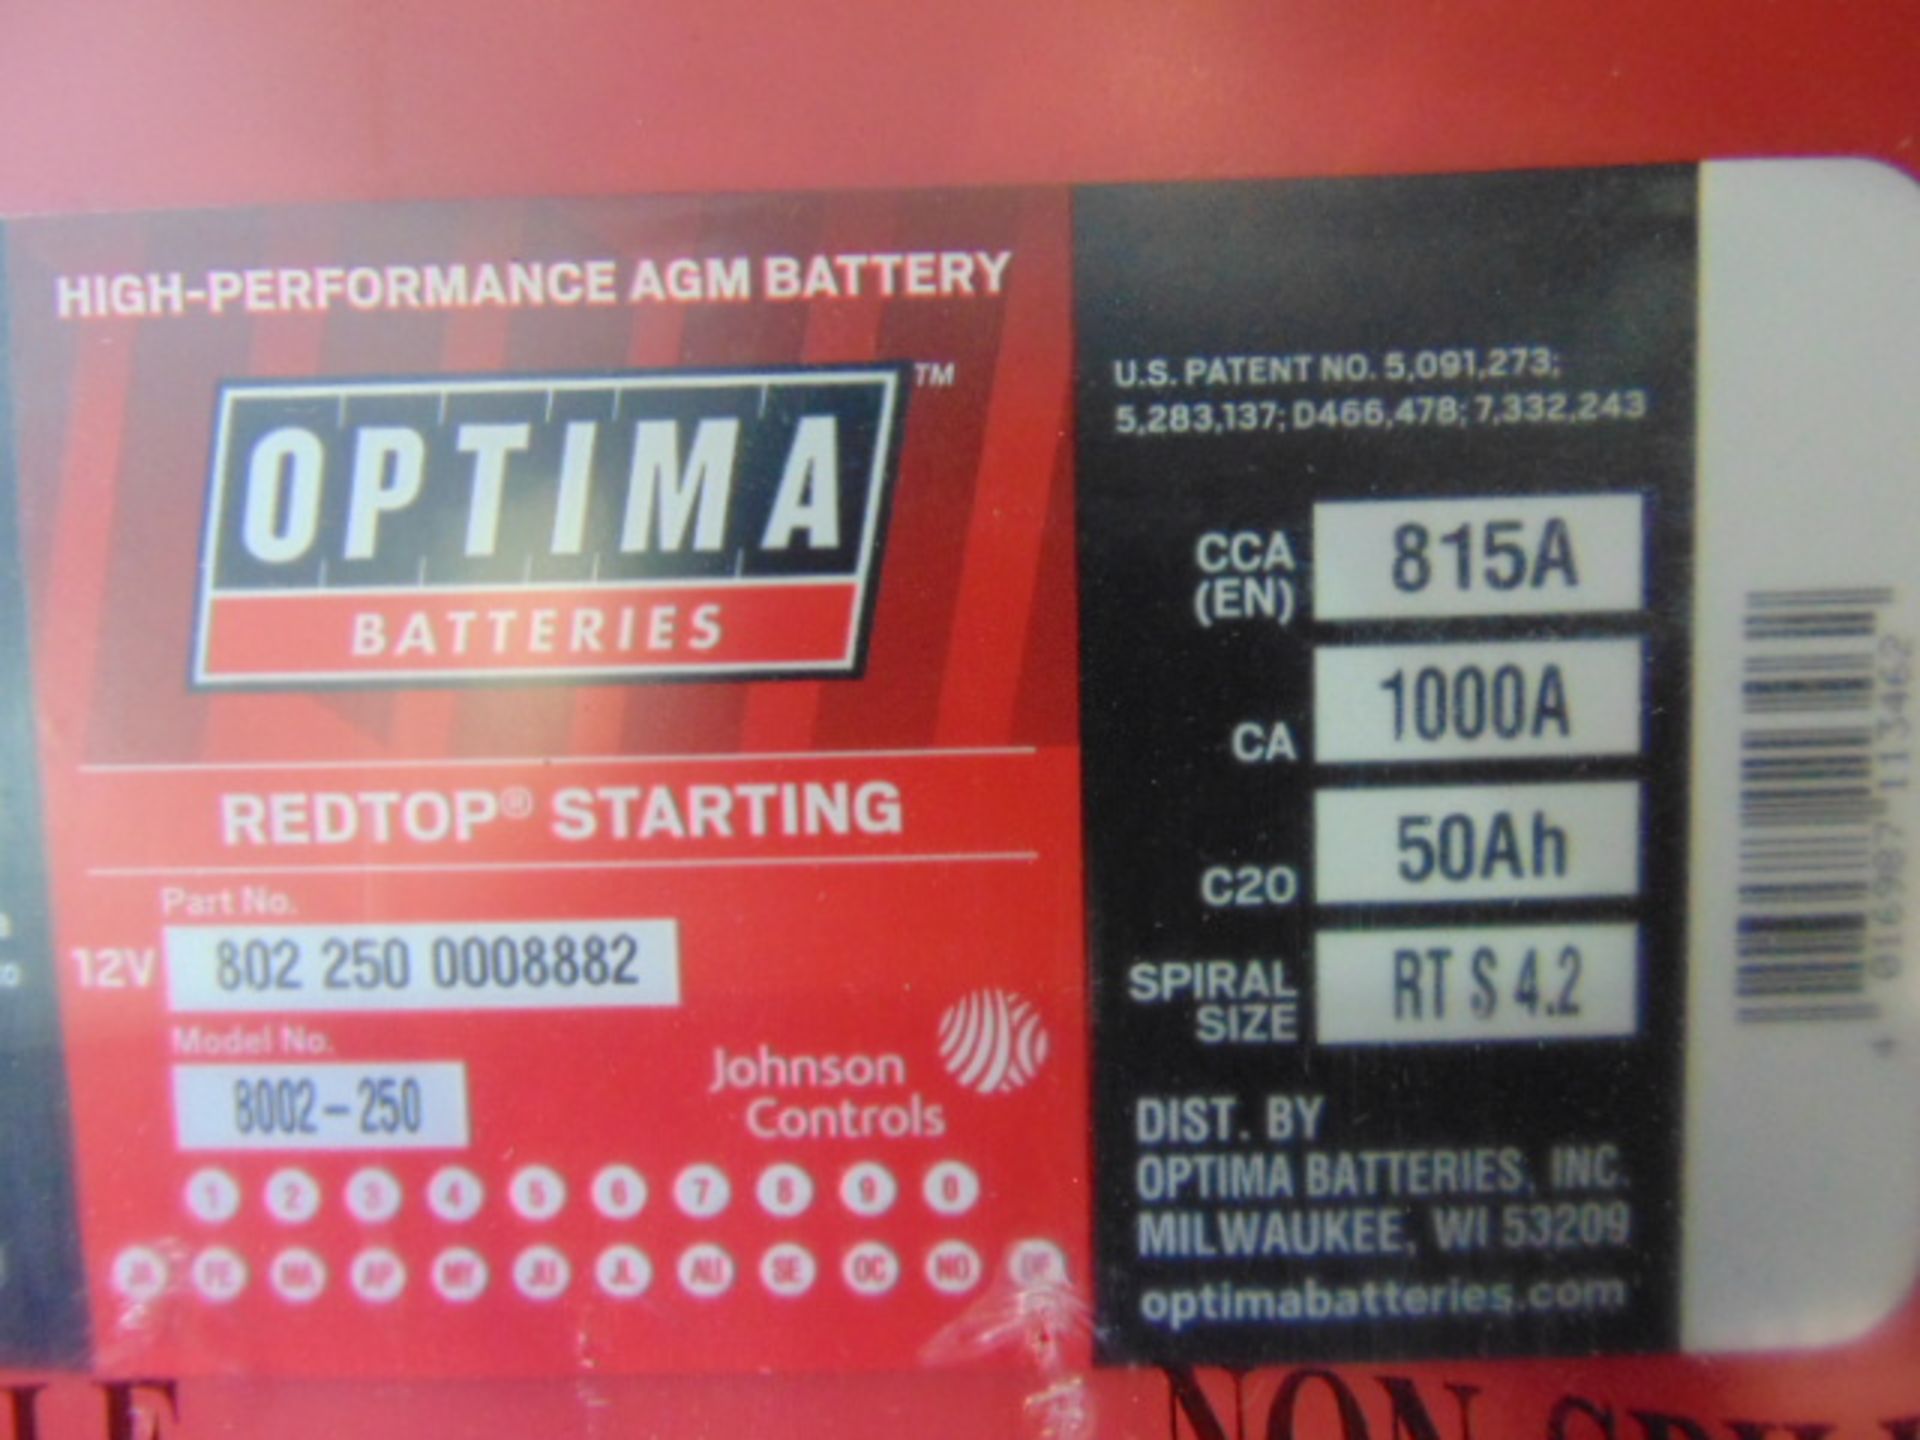 4 x Unissued RTS 4.2 Optima Red Top 12v Starting Batteries – (8002-250) RTS4.2 AGM - Image 4 of 4